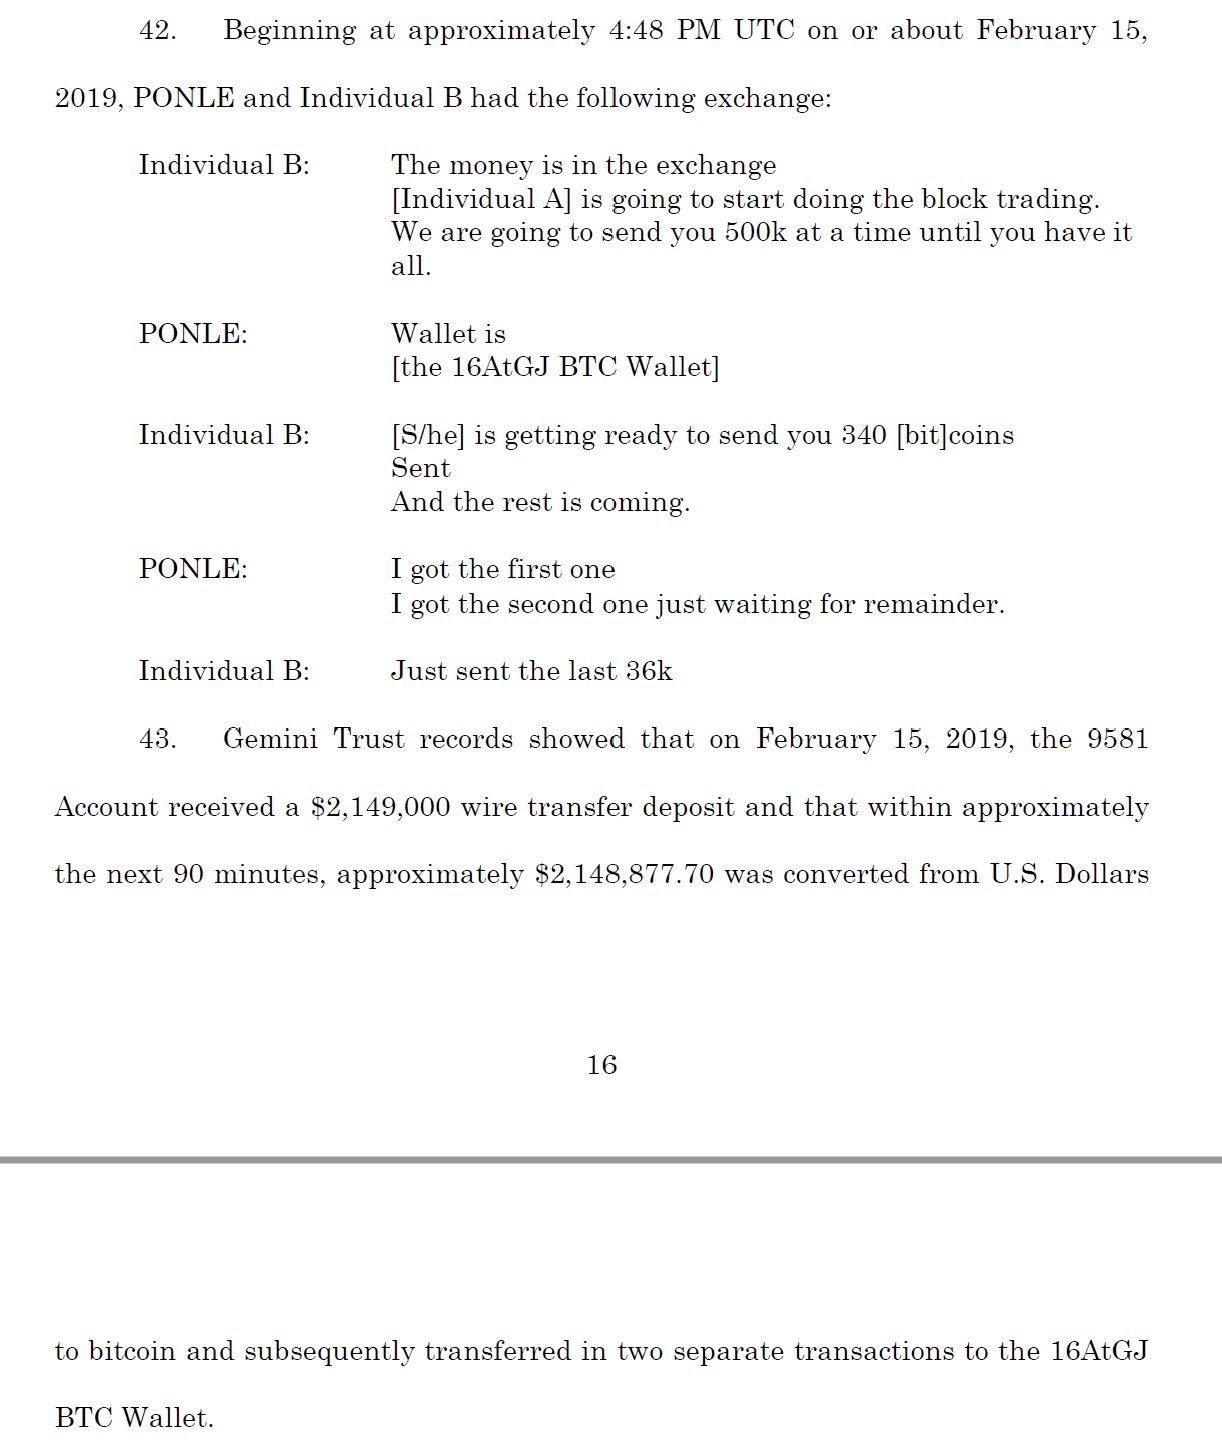 A discussion between Ponle and his associate of the Feb. 15, 2019 transaction